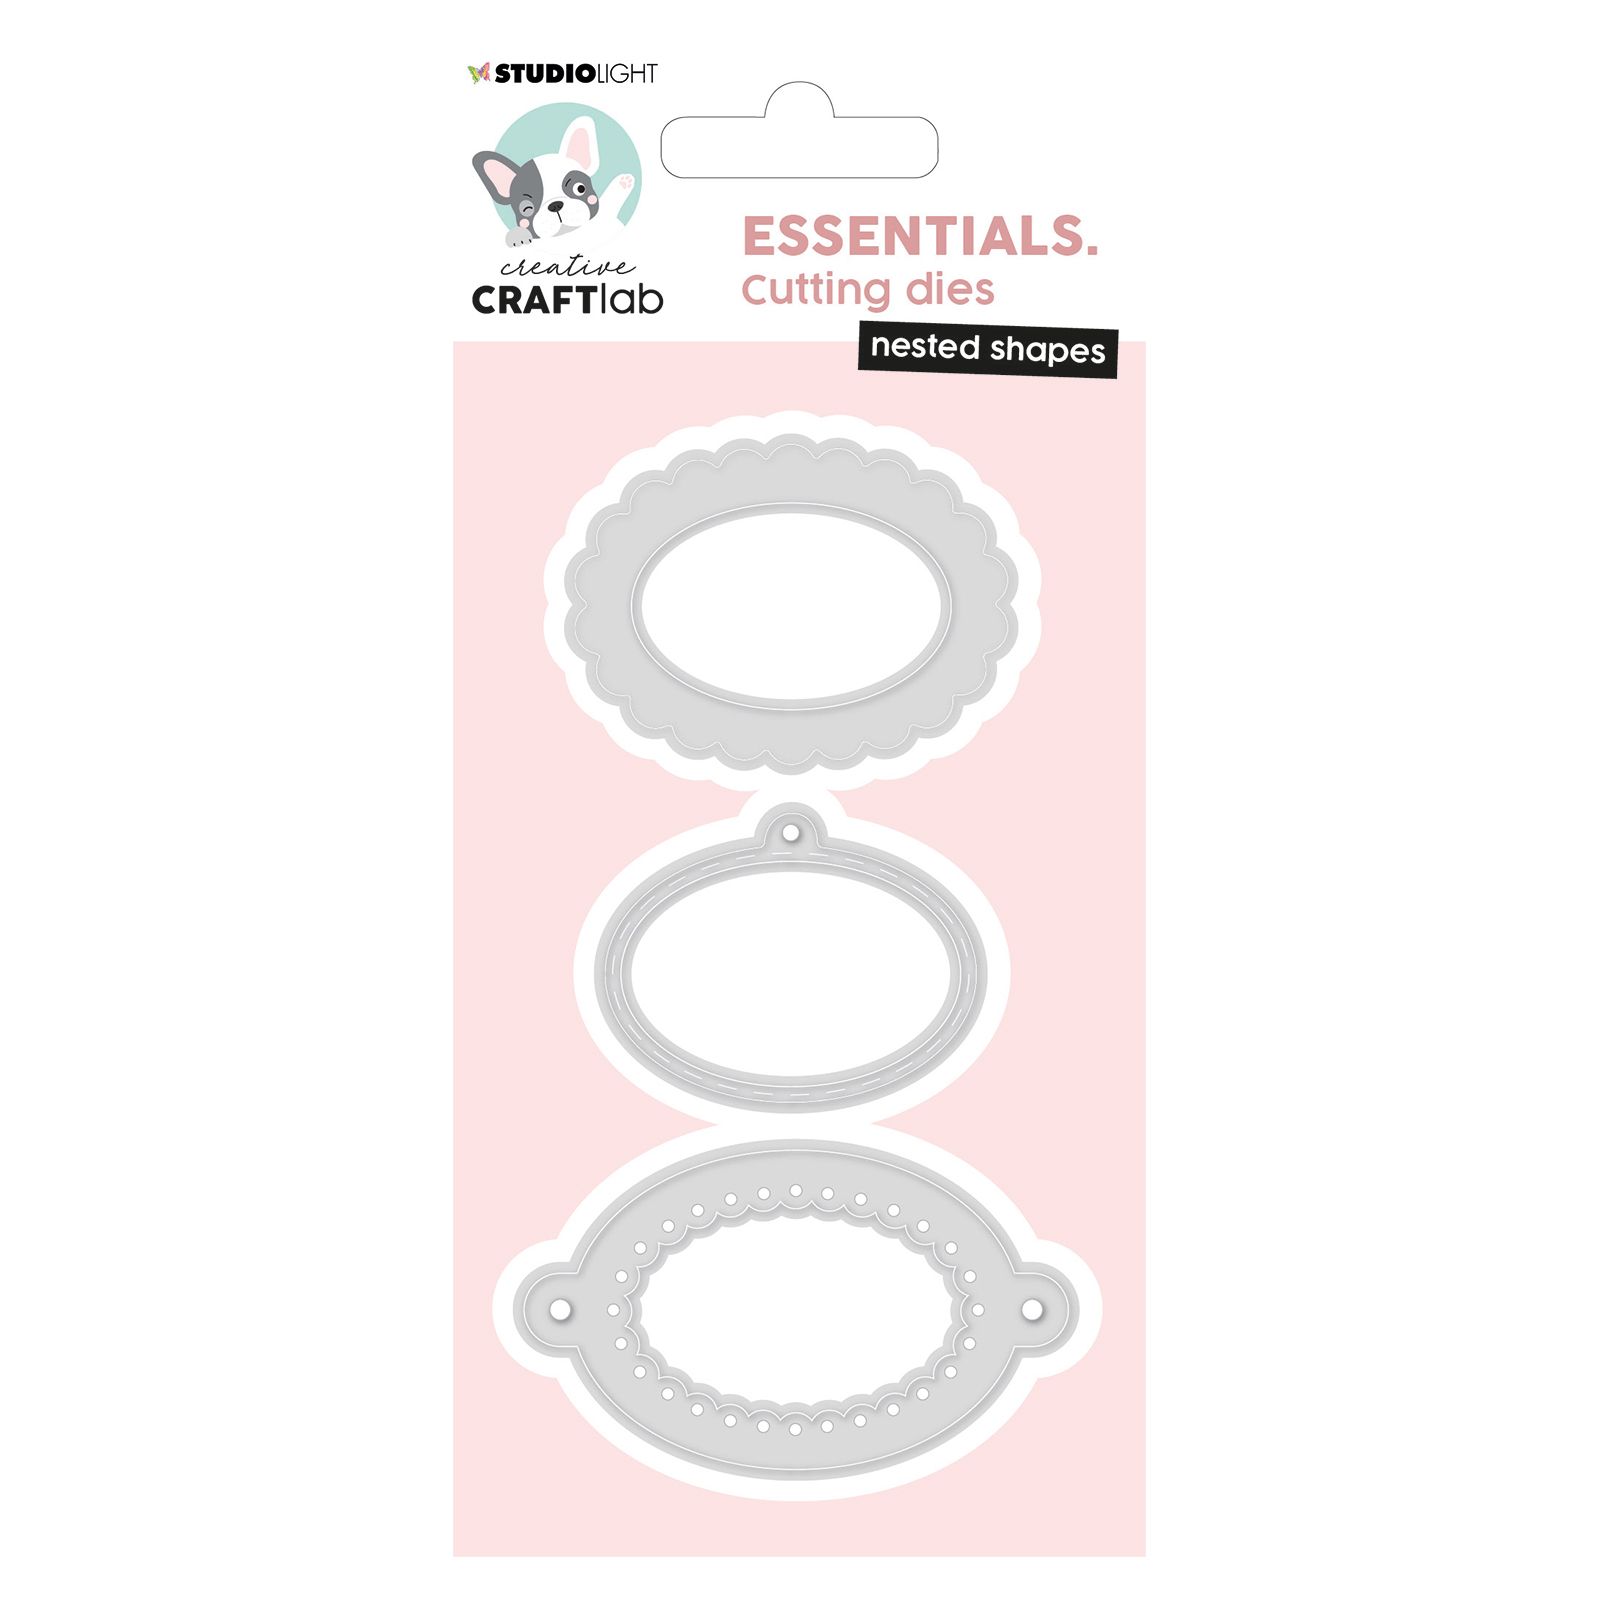 Creative Craftlab • Essentials cutting die Nested shapes oval